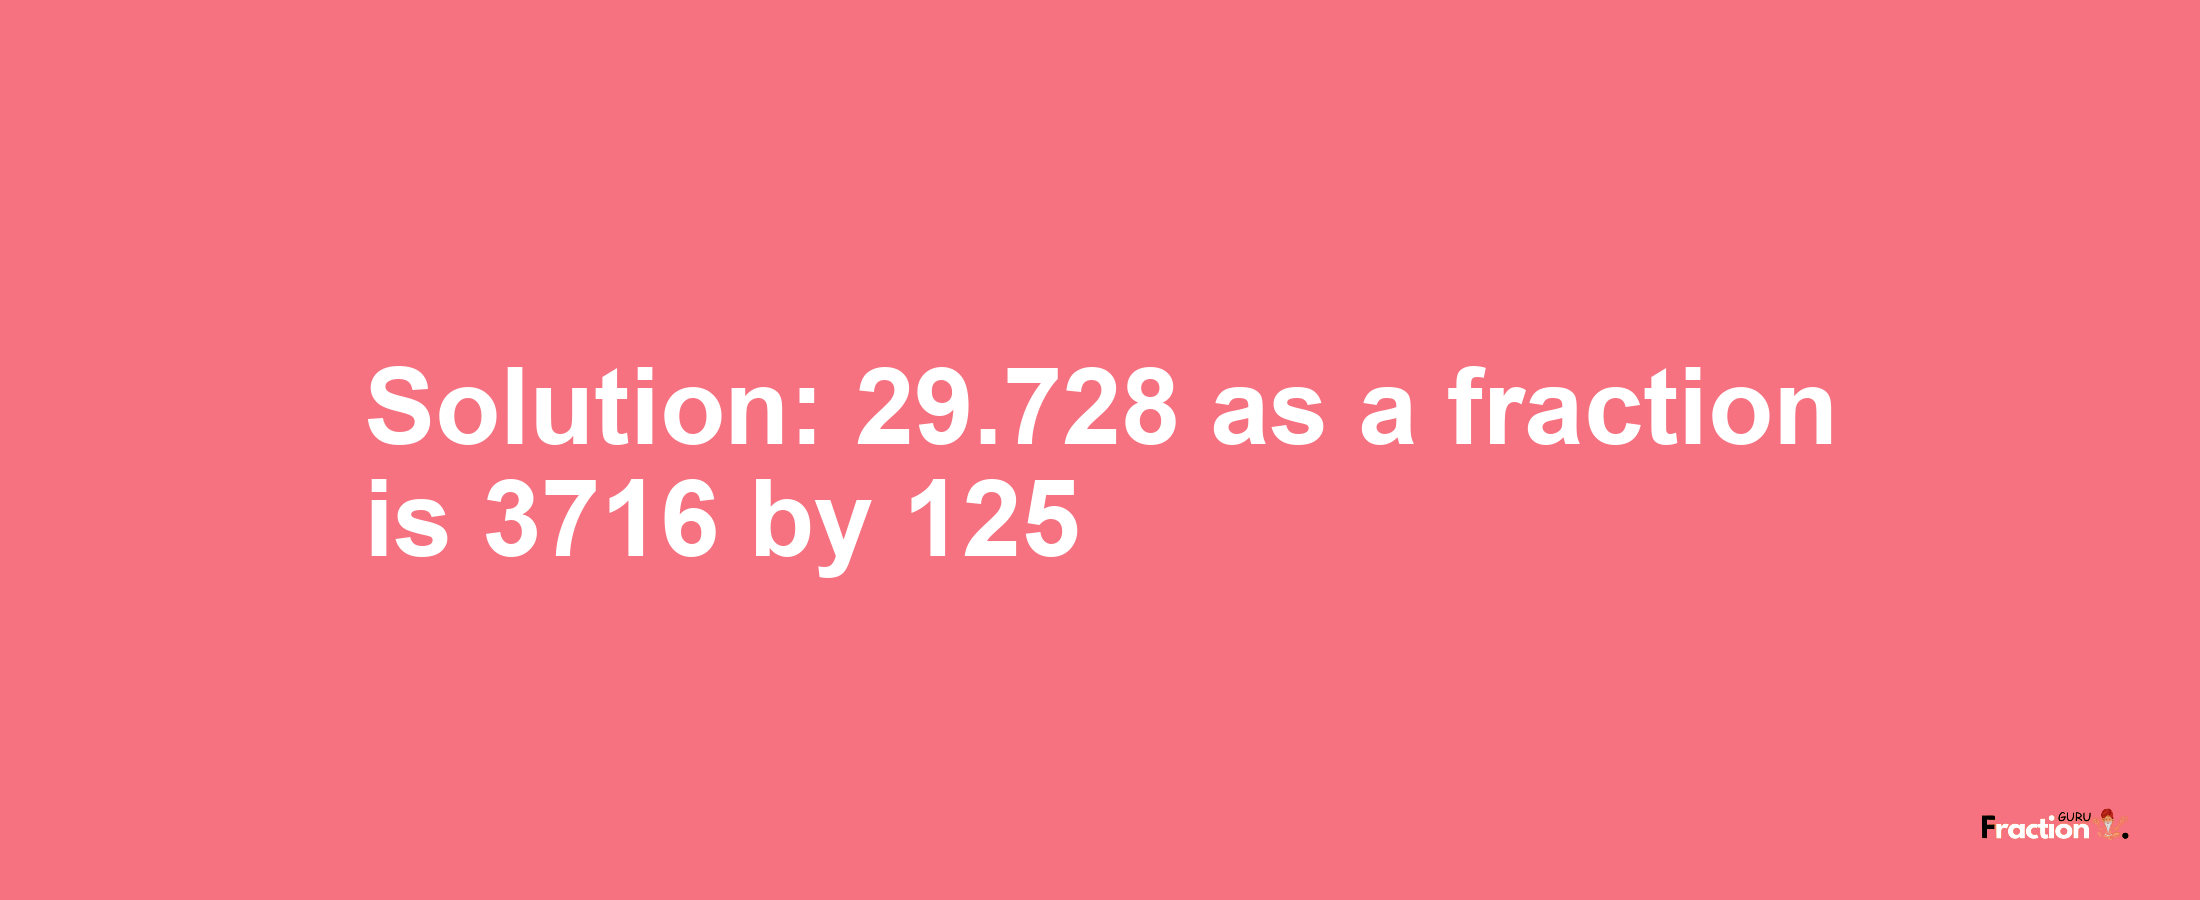 Solution:29.728 as a fraction is 3716/125